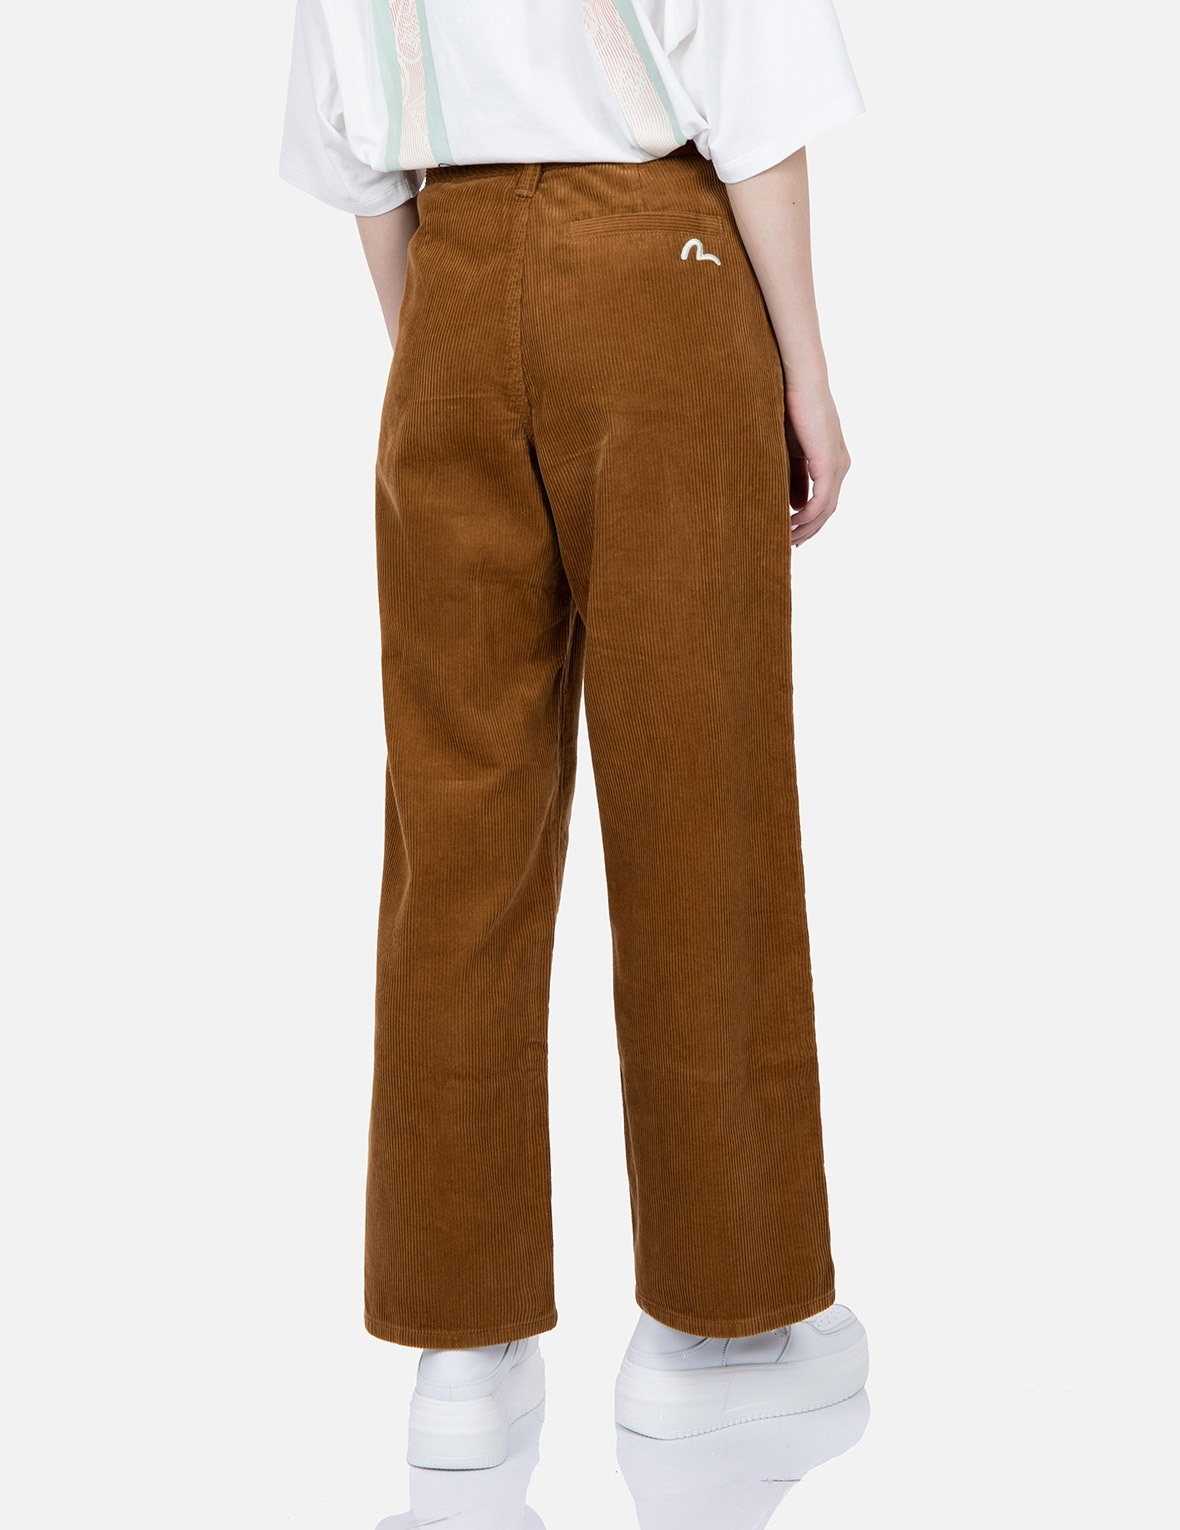 SEAGULL EMBROIDERY STRAIGHT-FIT CORDUROY TROUSERS - 7